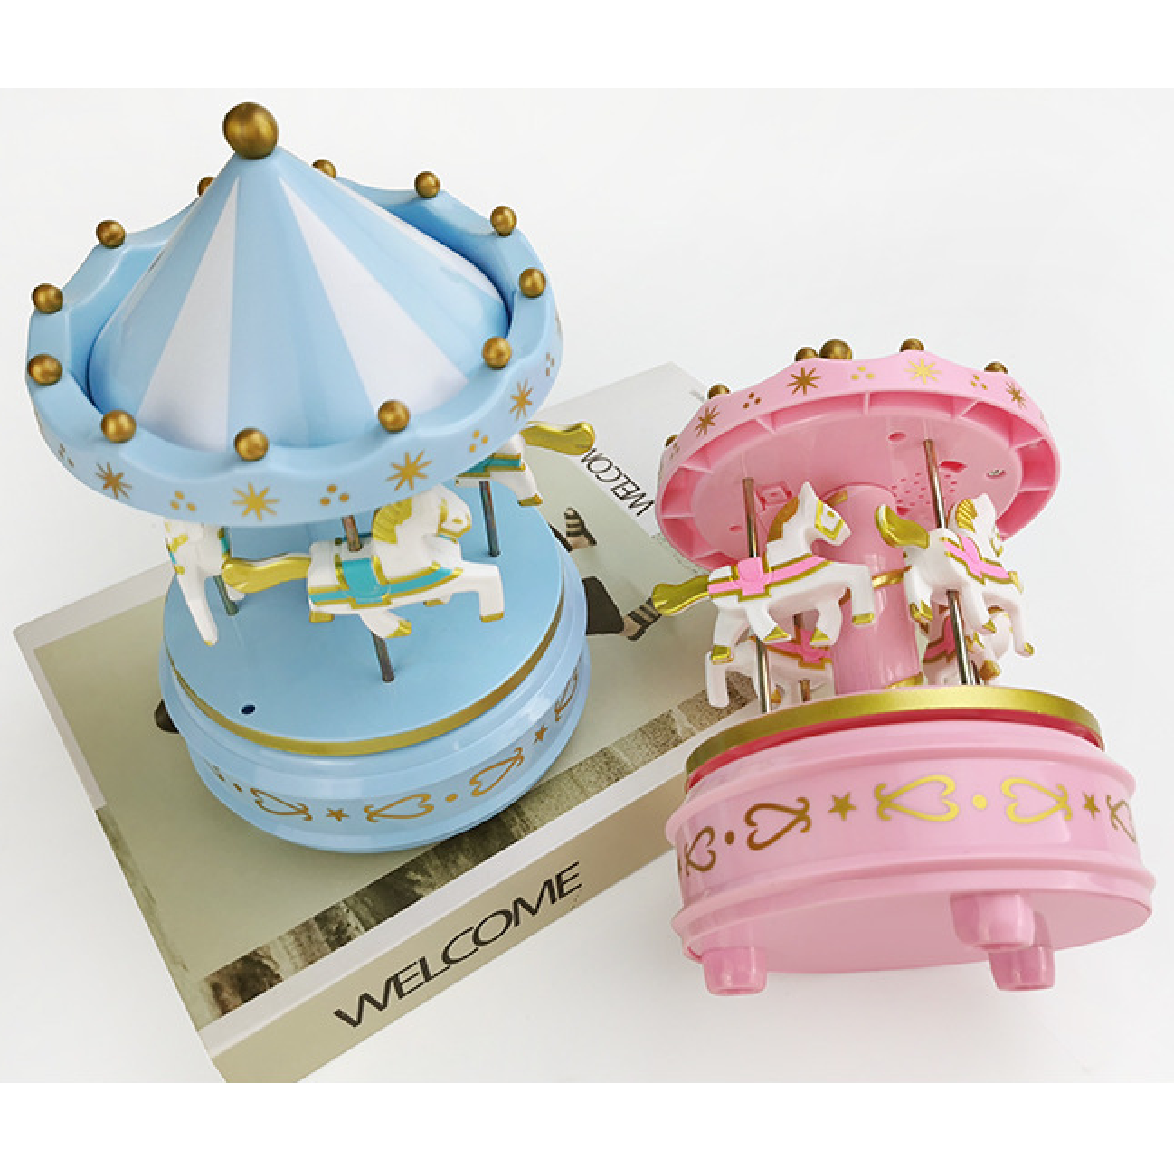 Cake Topper Decorations  - 'Musical Carousel' - Pink - Rampant Coffee Company